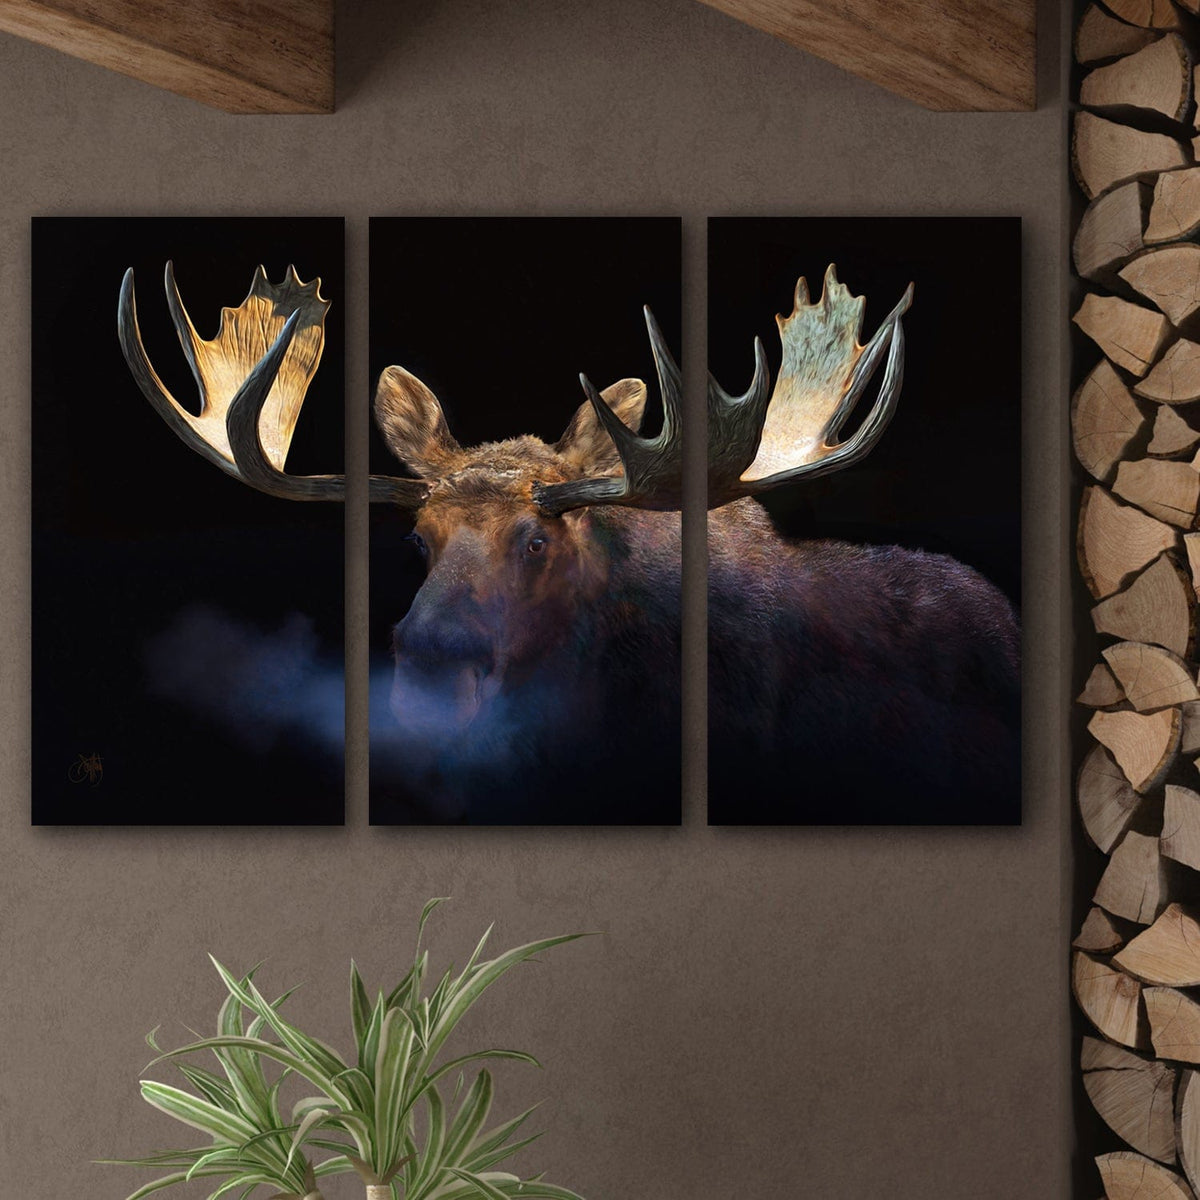 oversized wildlife wall art of Bull Moose rustic decor from Personal Prints